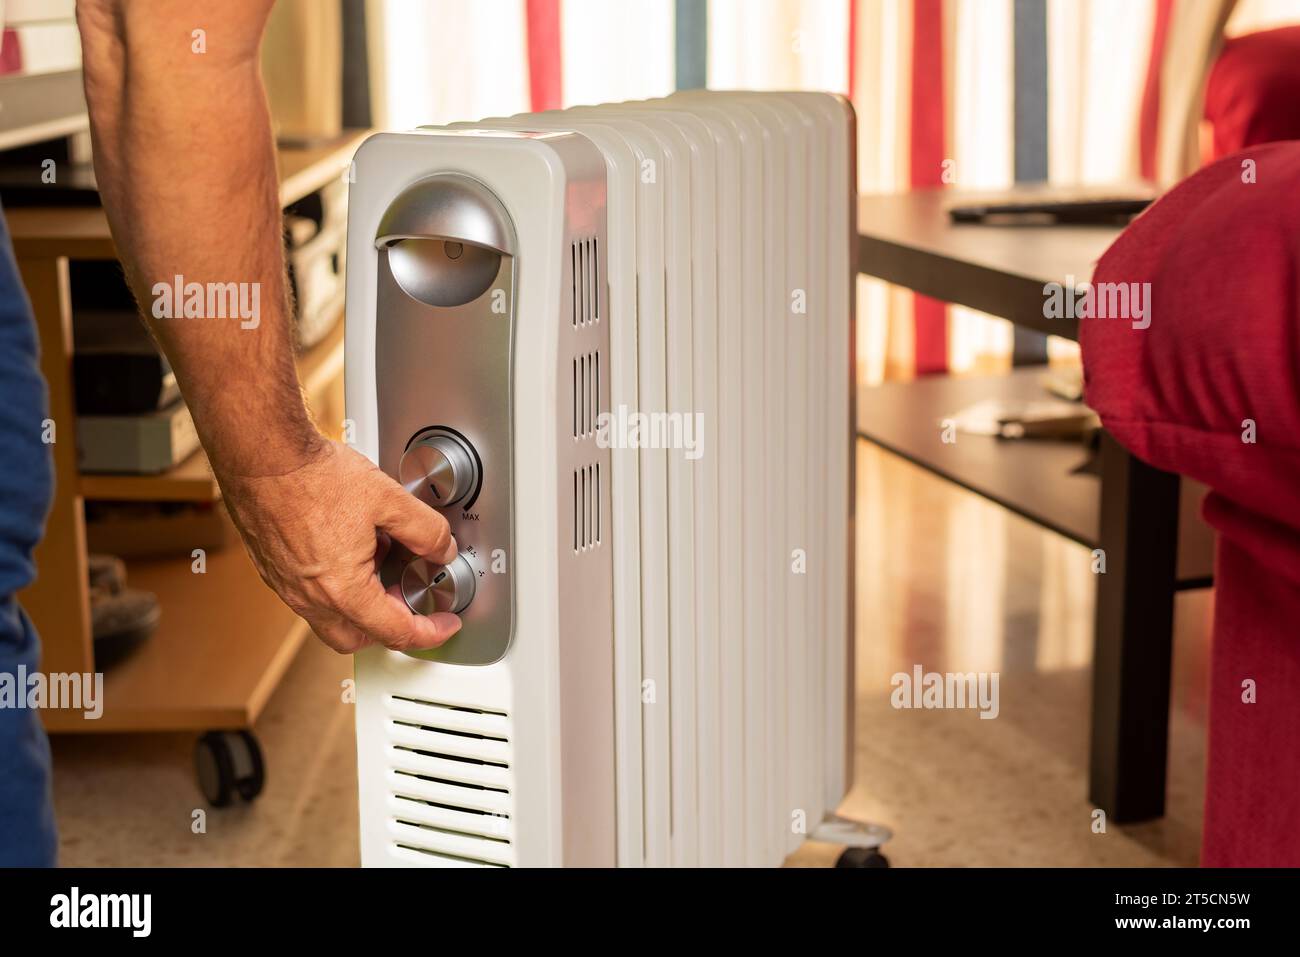 Man's hand selecting the temperature on a home radiator in the living room. Stock Photo